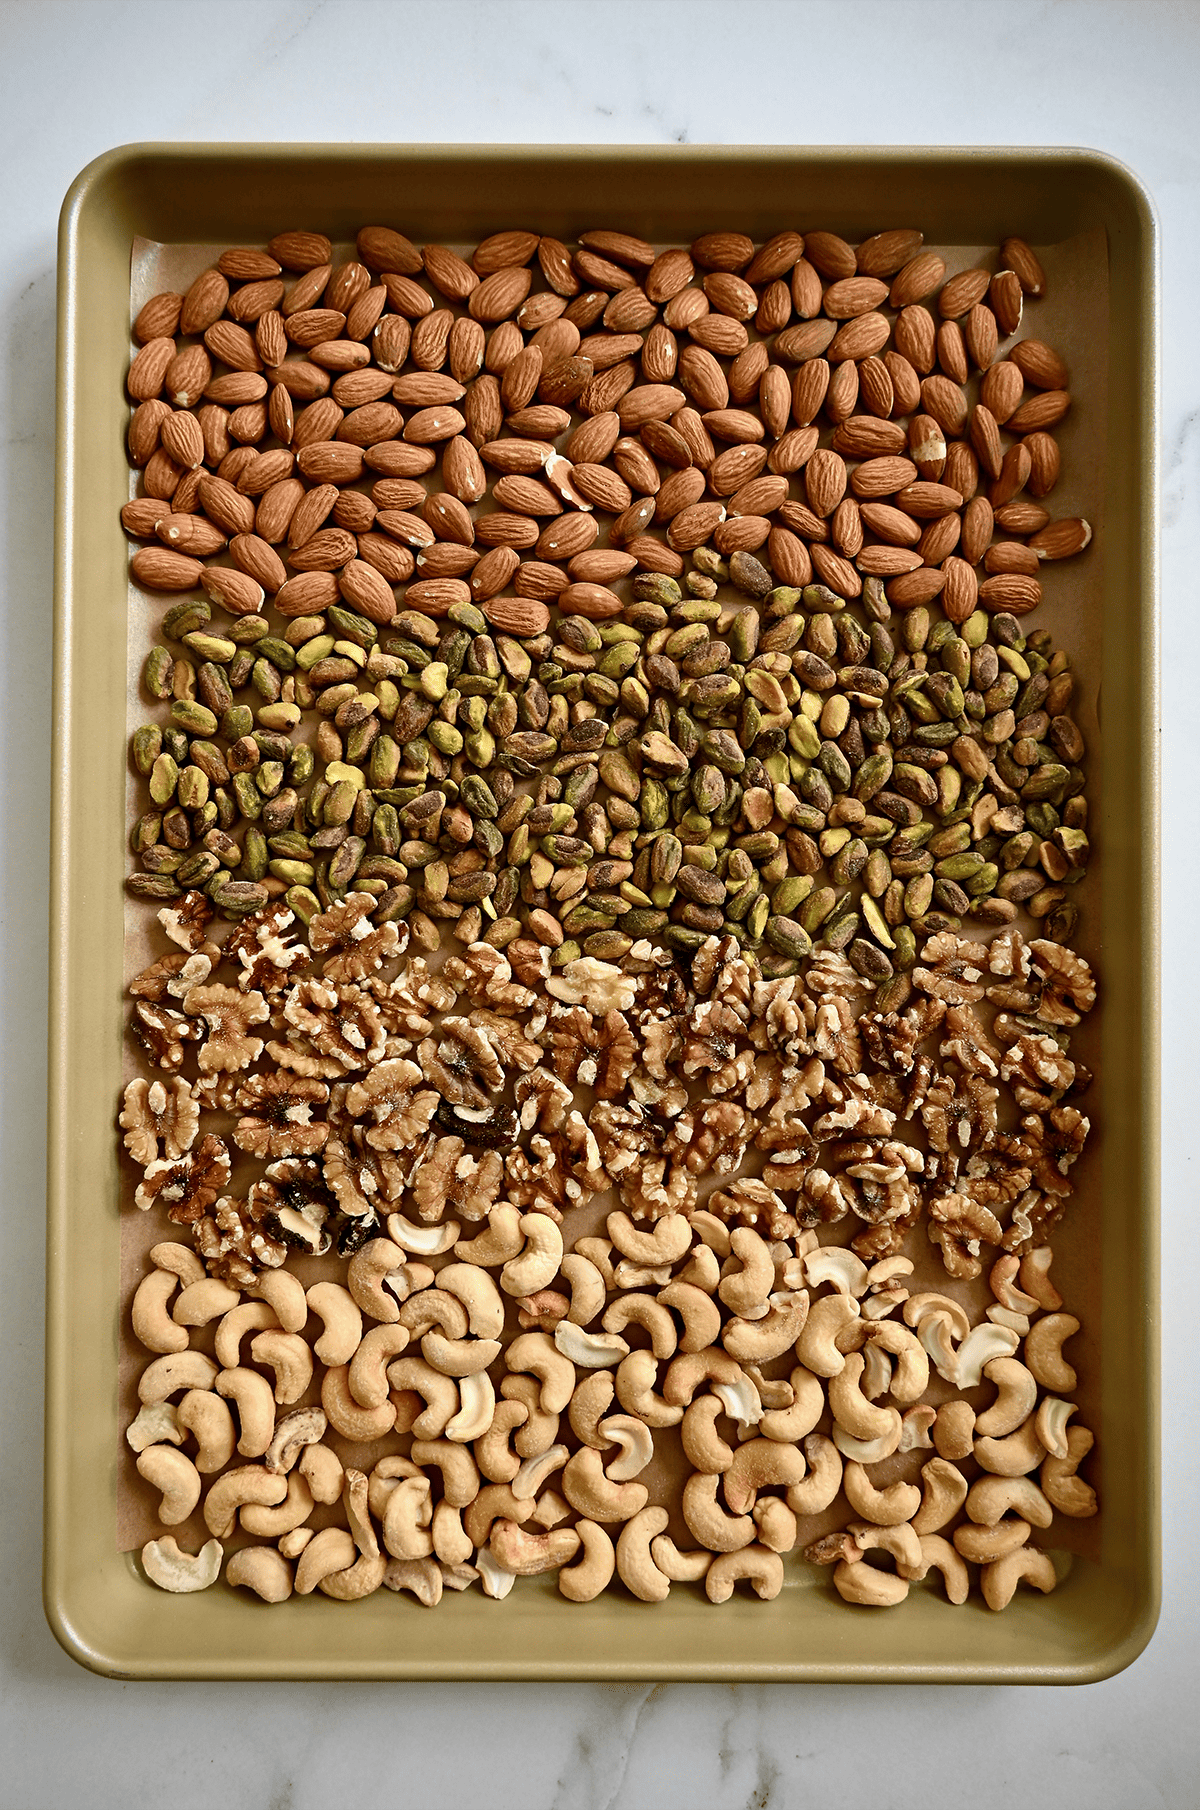 Rows of almonds, pistachios, walnuts and cashews on a parchment-lined baking sheet.